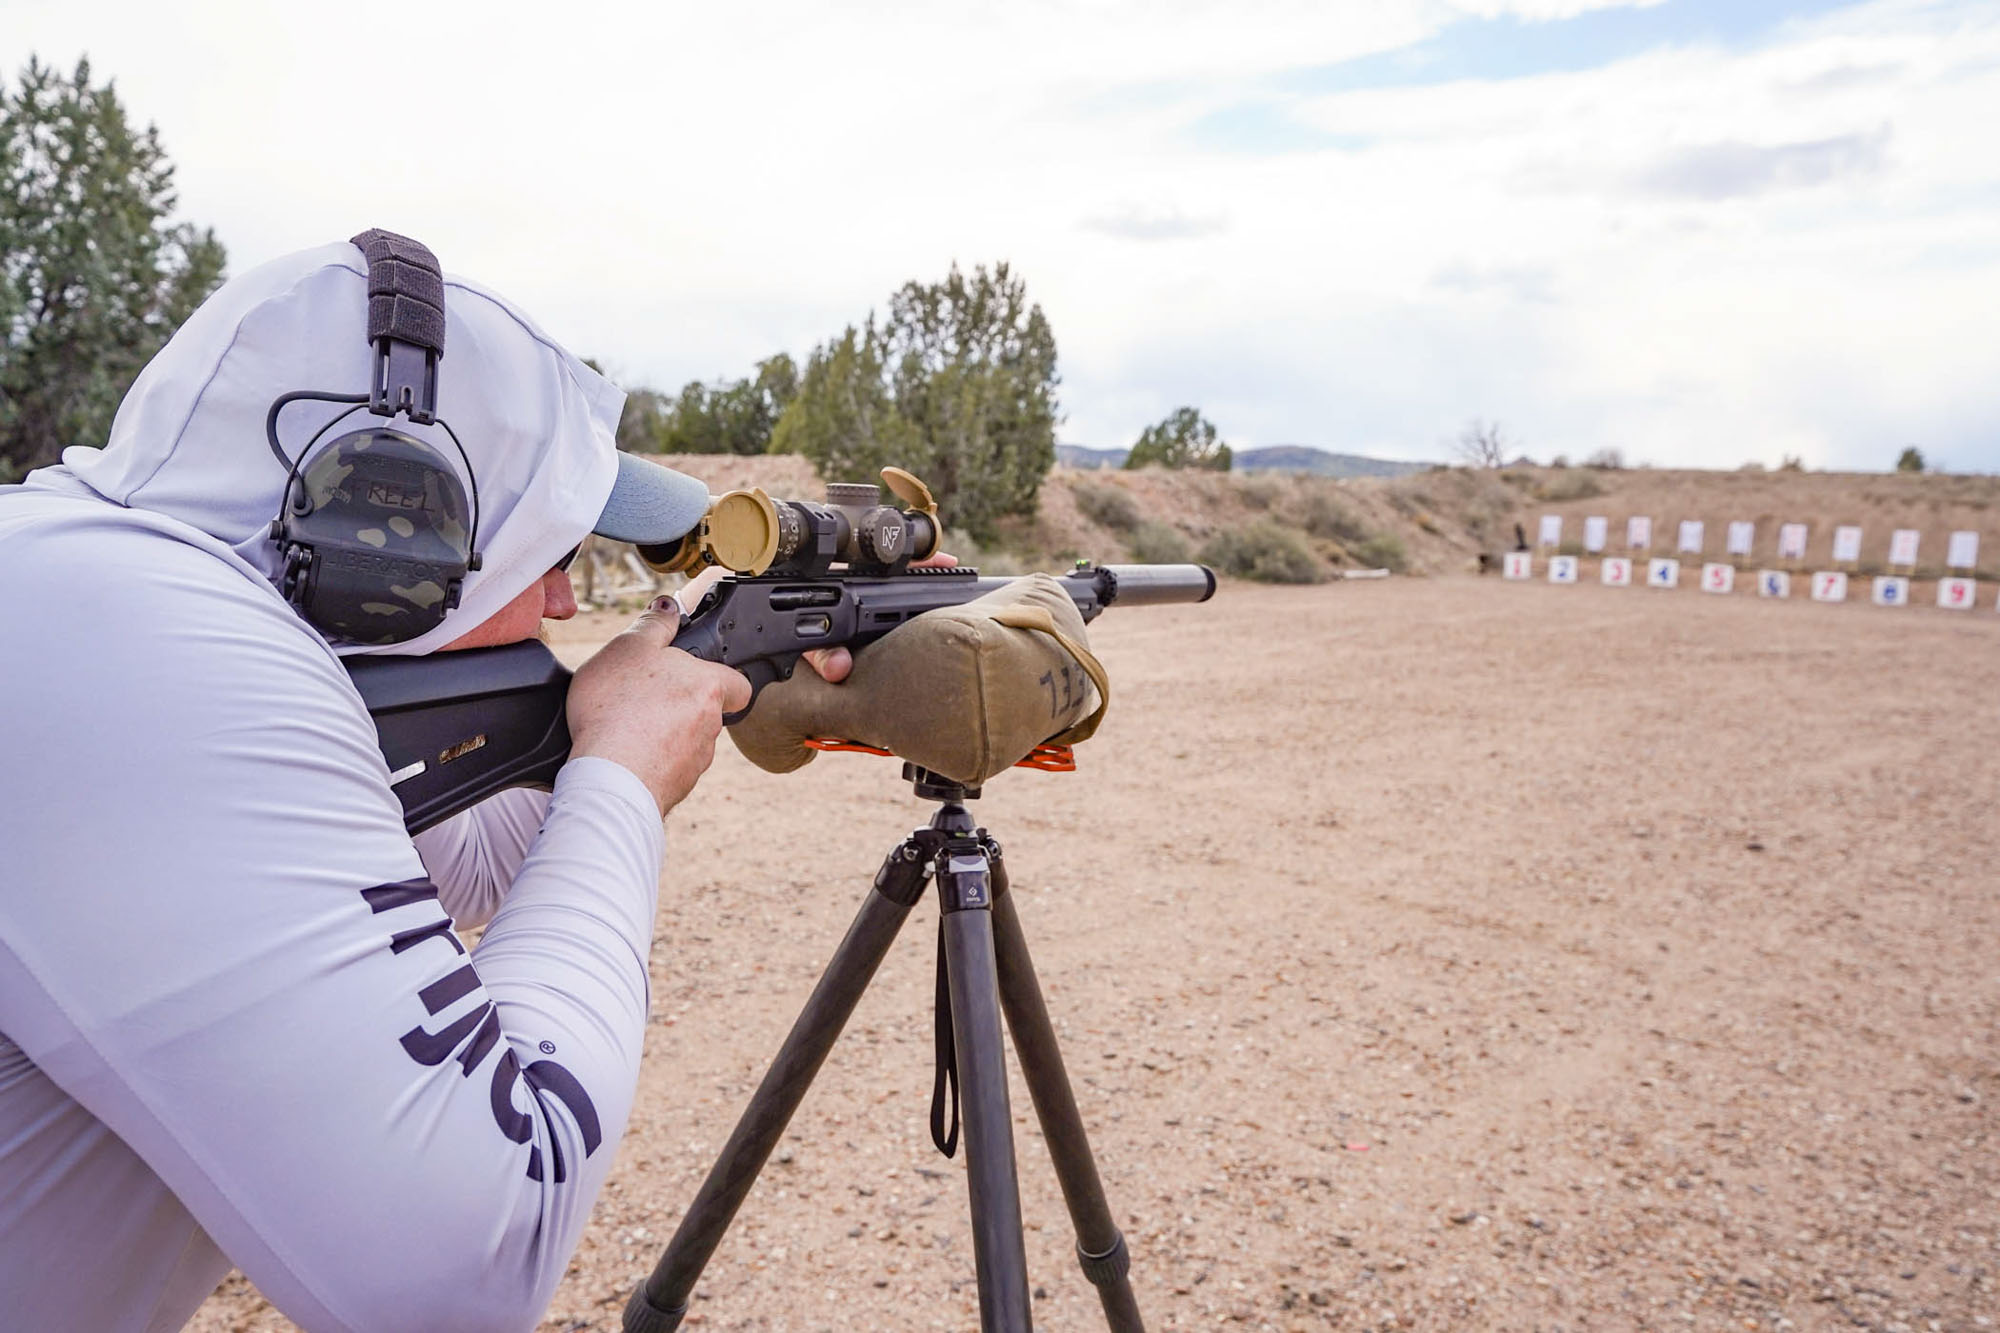 Shooting a lever action off a tripod and bag for accuracy.